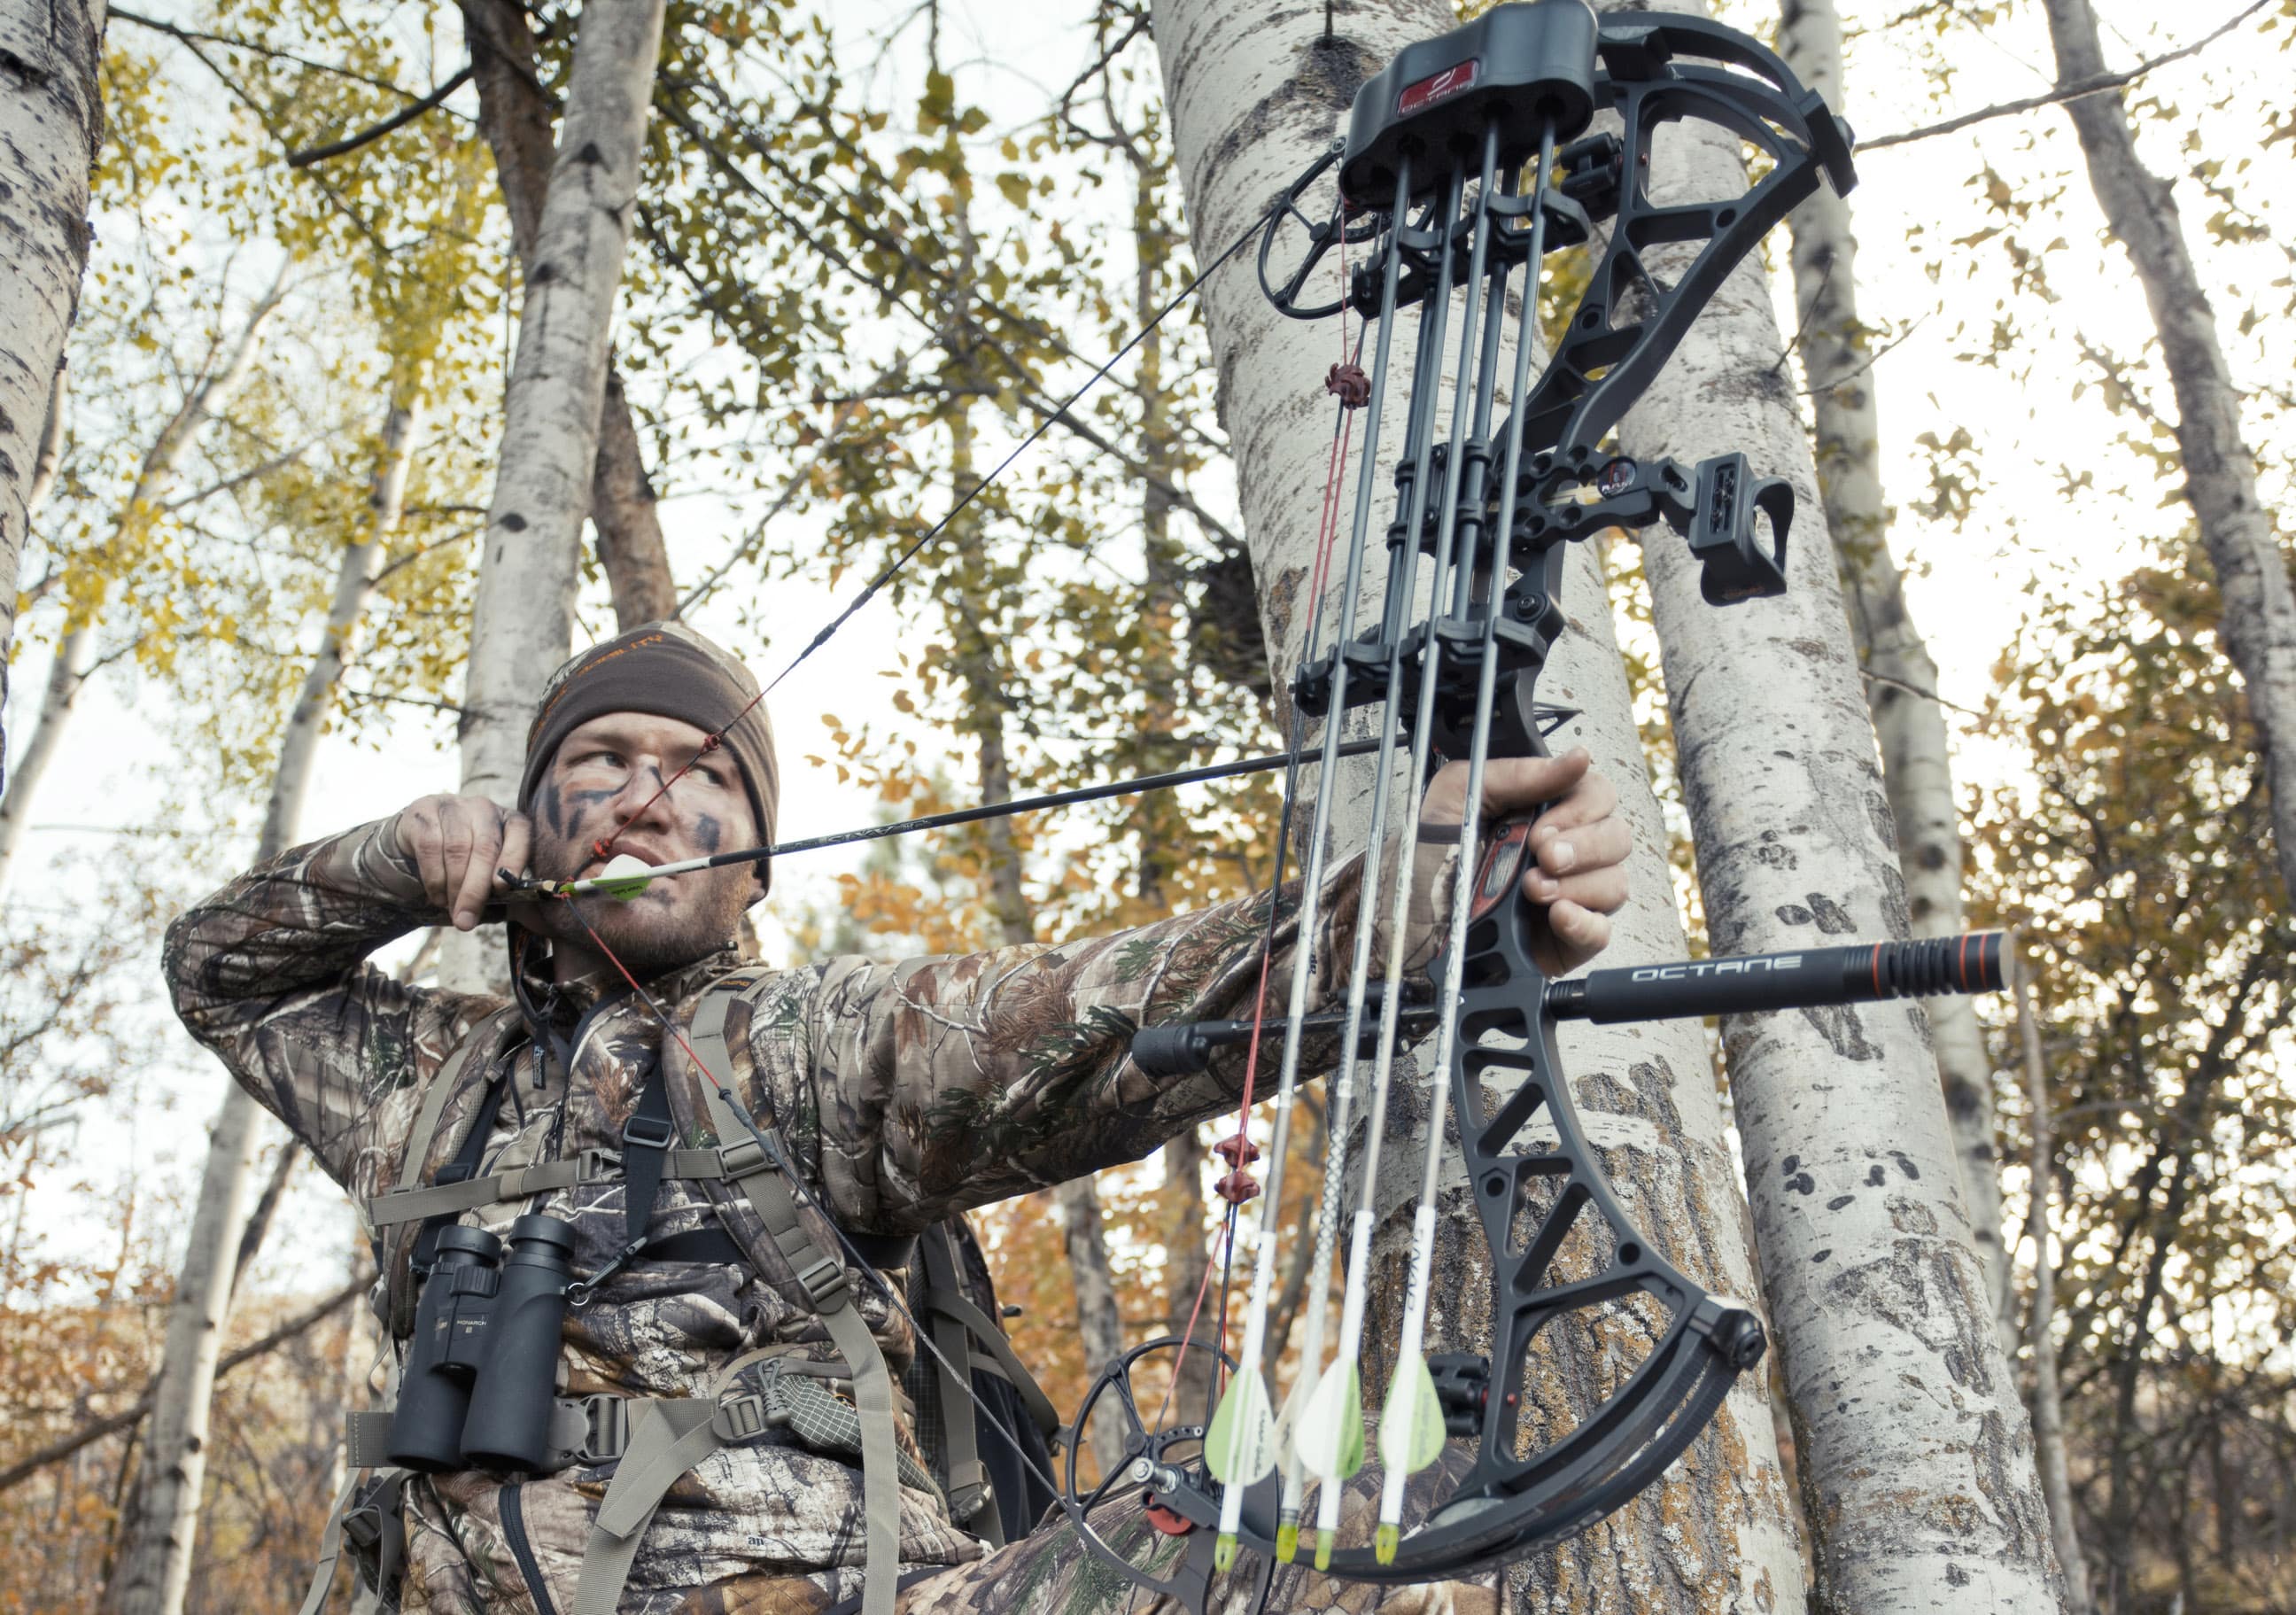 Perfect Line 6 Arrow Quiver in Autumn Camo for Compound Bow or